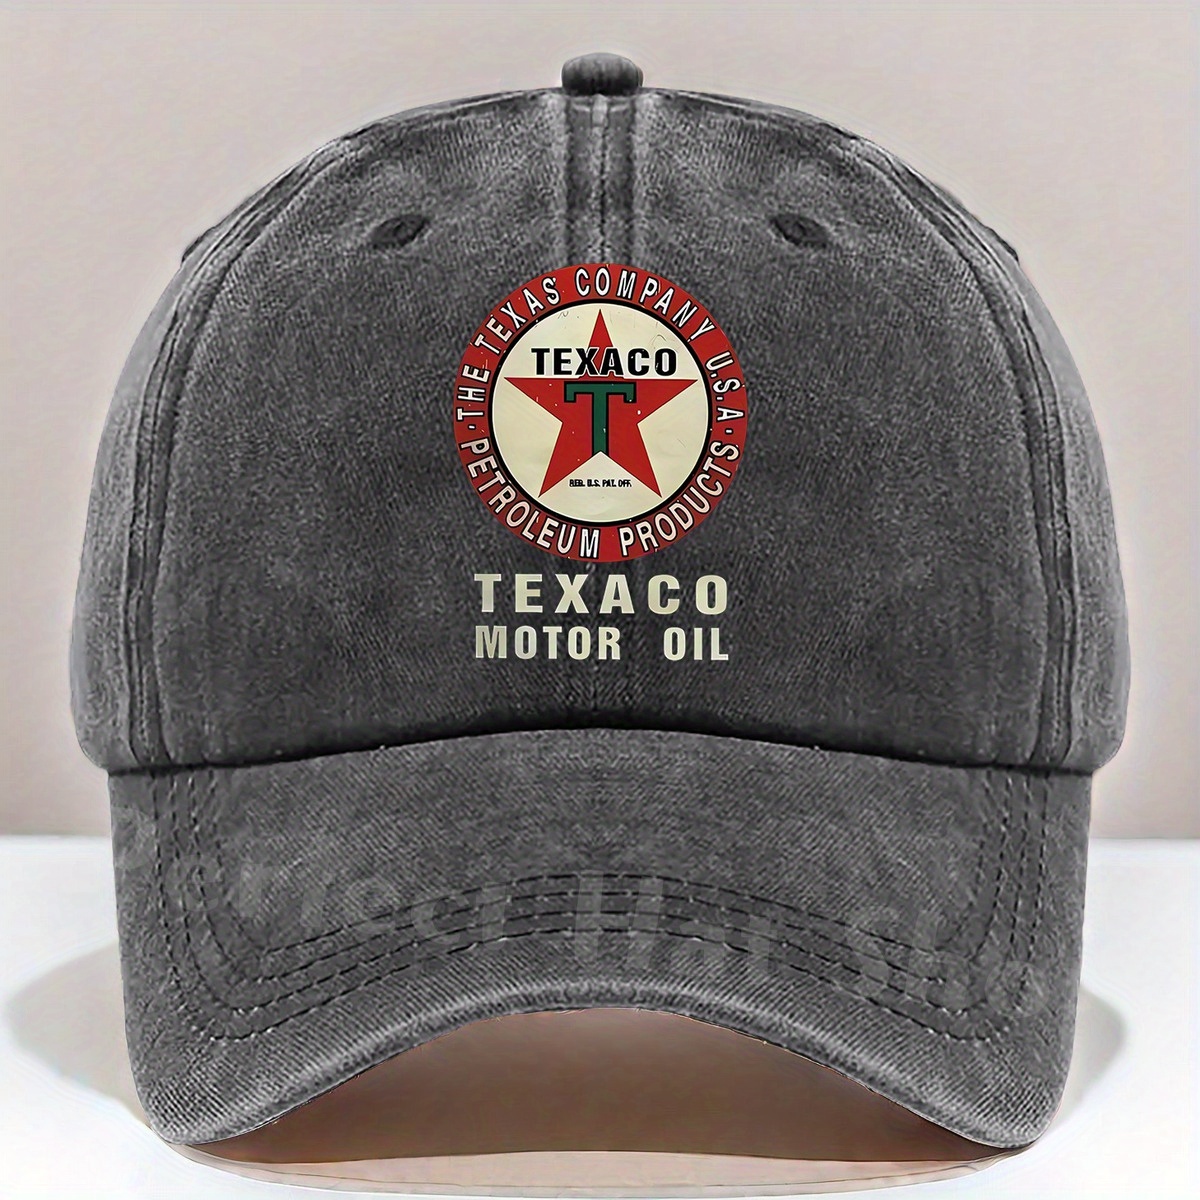 

Texaco Motor Oil Print Baseball Cap - Adjustable, Sun-protective Cotton Dad Hat For Women In Multiple Colors